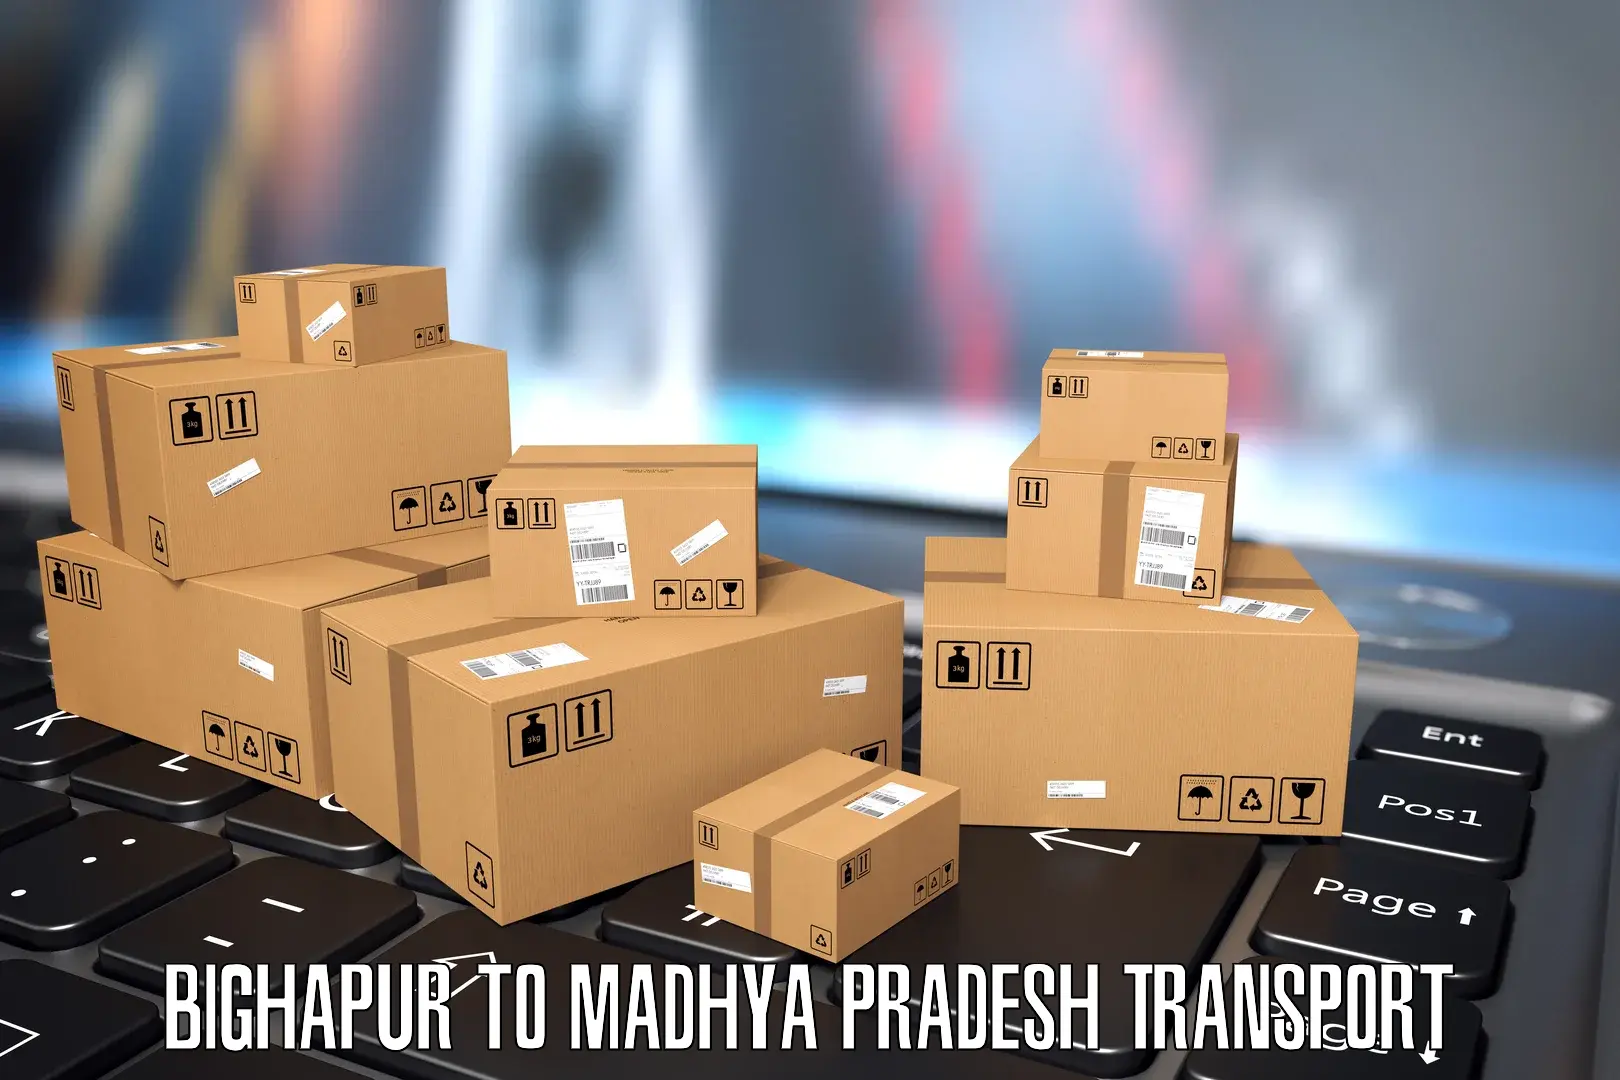 Commercial transport service Bighapur to IIT Indore